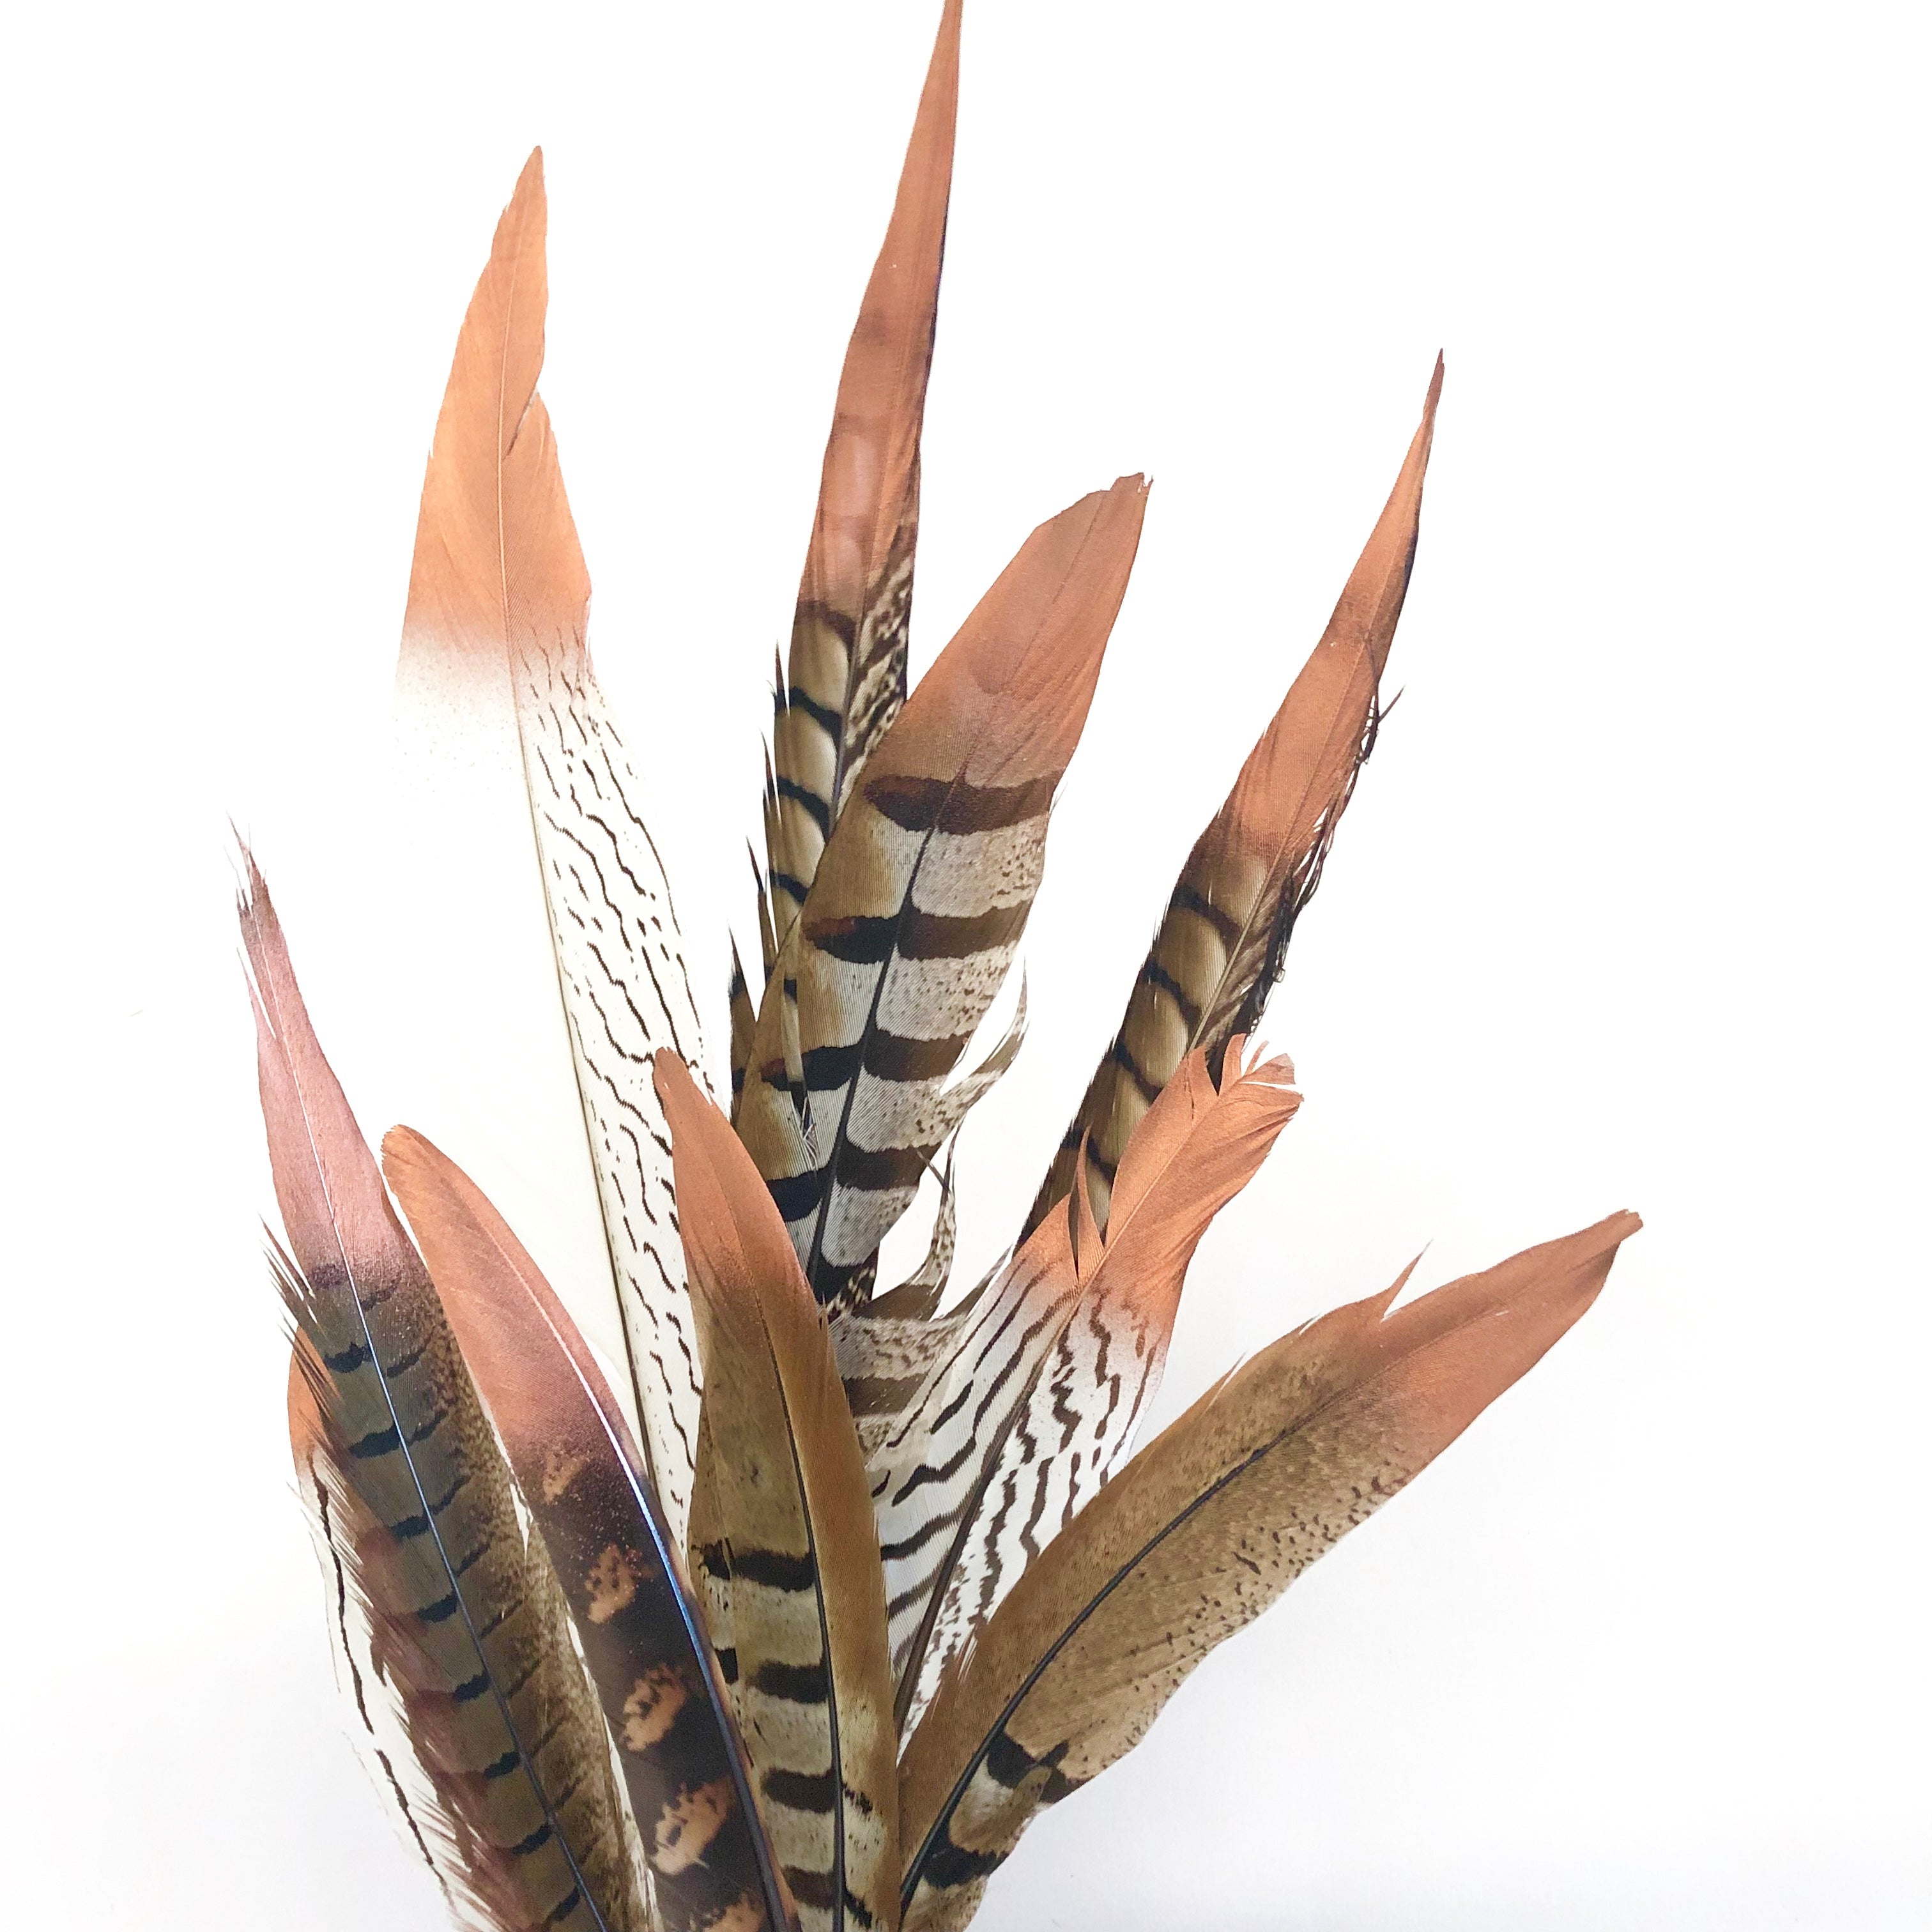 Natural Pheasant Feathers Assorted - Metallic Copper Tipped x 10